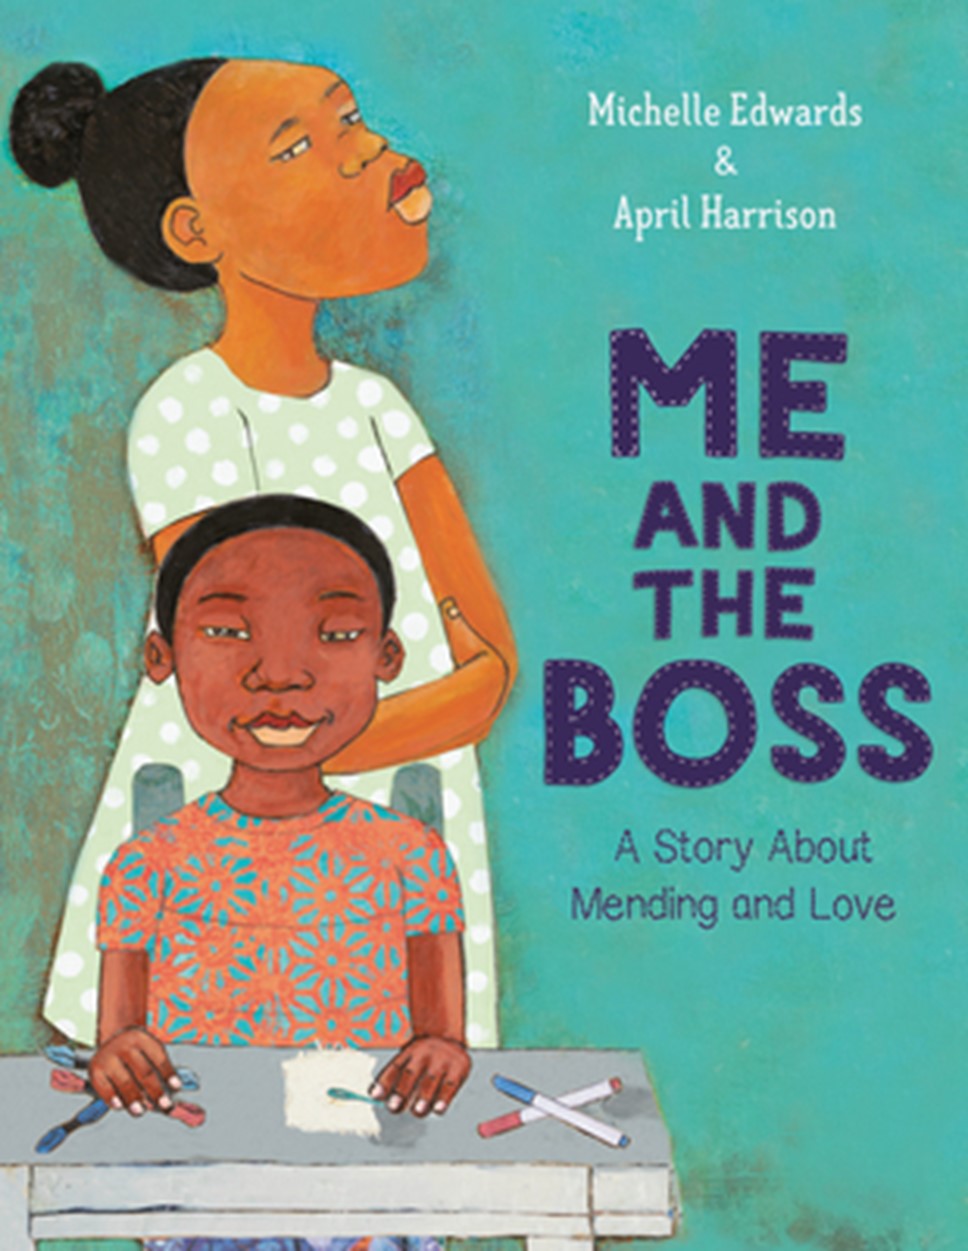 Me and the Boss: A Story About Mending and Love by Michelle Edwards (author) and April Harrison (illustrator) – (Anne Schwartz Books)